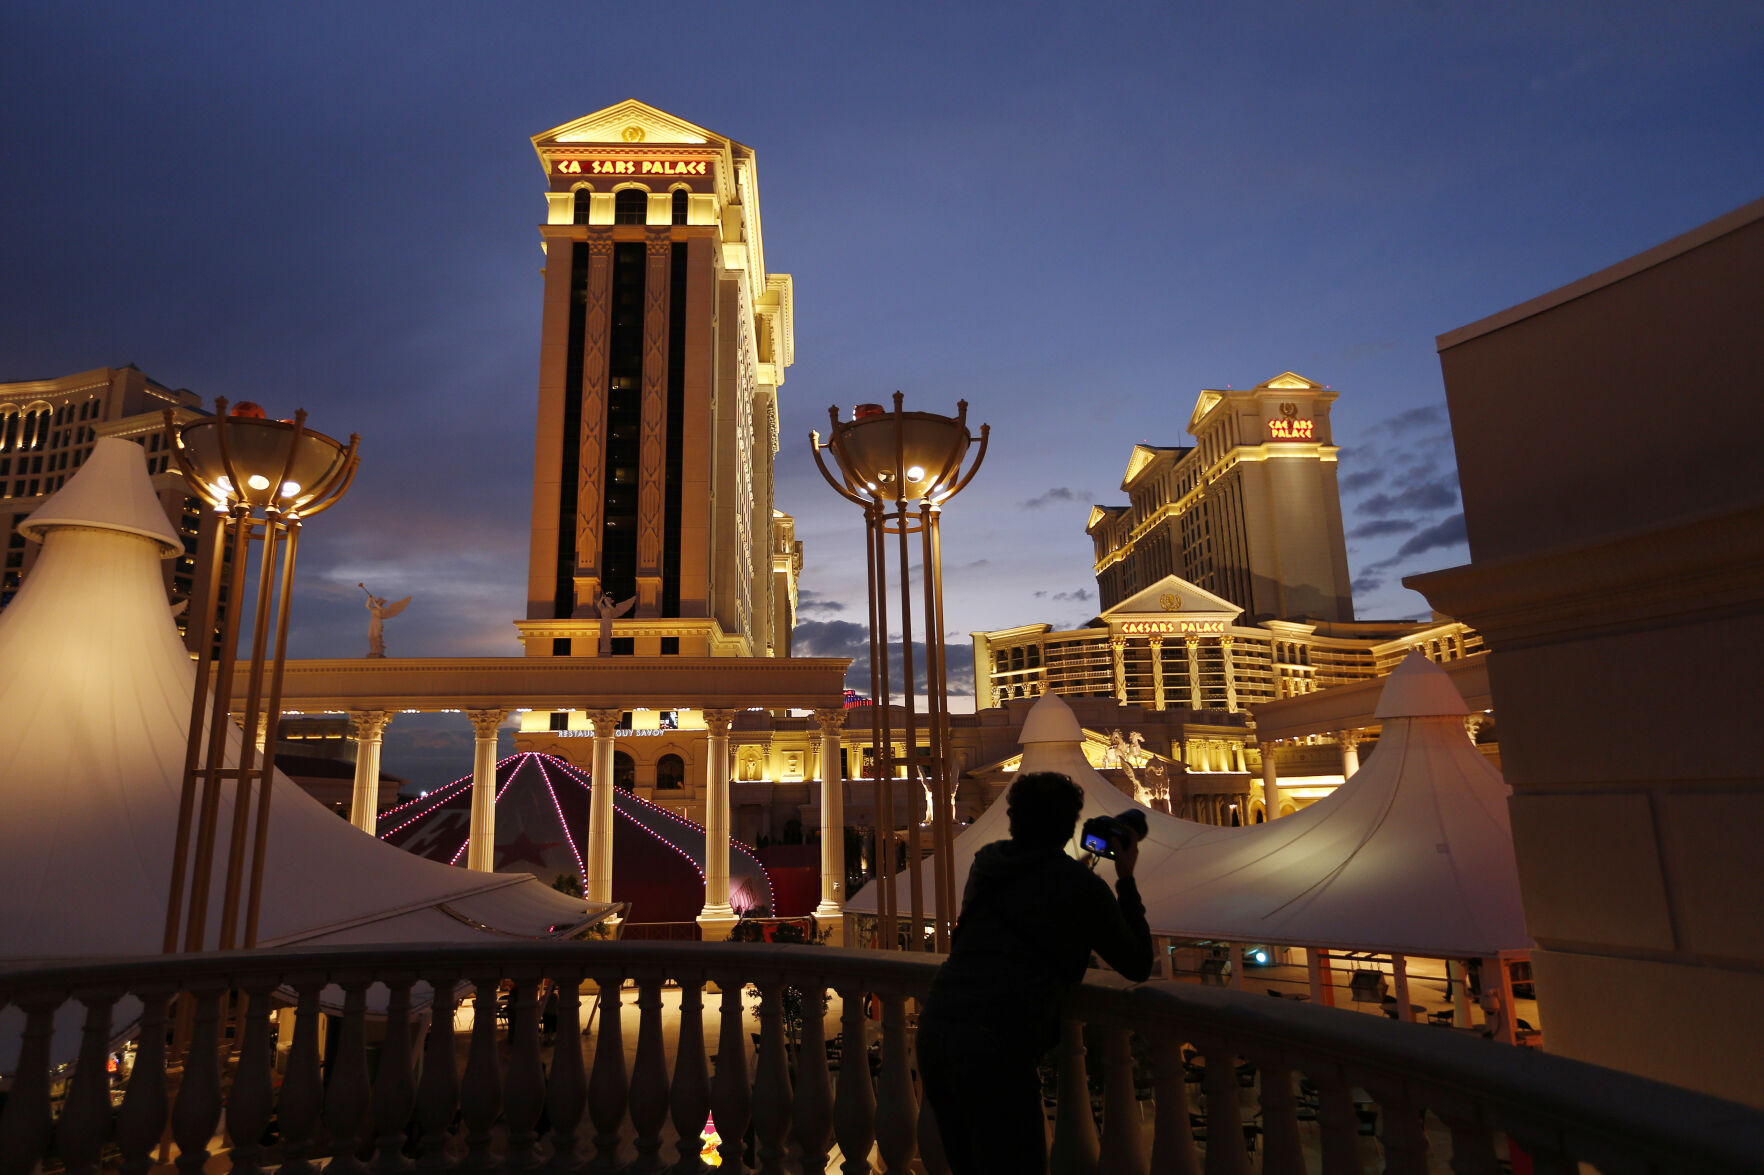 <p>FILE - A man takes pictures of Caesars Palace hotel and casino in Las Vegas, Jan. 12, 2015. The Culinary Workers Union in Las Vegas has reached a tentative deal with casino giant Caesars Entertainment that could help avert a sweeping strike. The deal announced early Wednesday, Nov. 8, 2023, marks a major breakthrough after several months of unsuccessful negotiations. (AP Photo/John Locher, File)</p>   PHOTO CREDIT: John Locher 